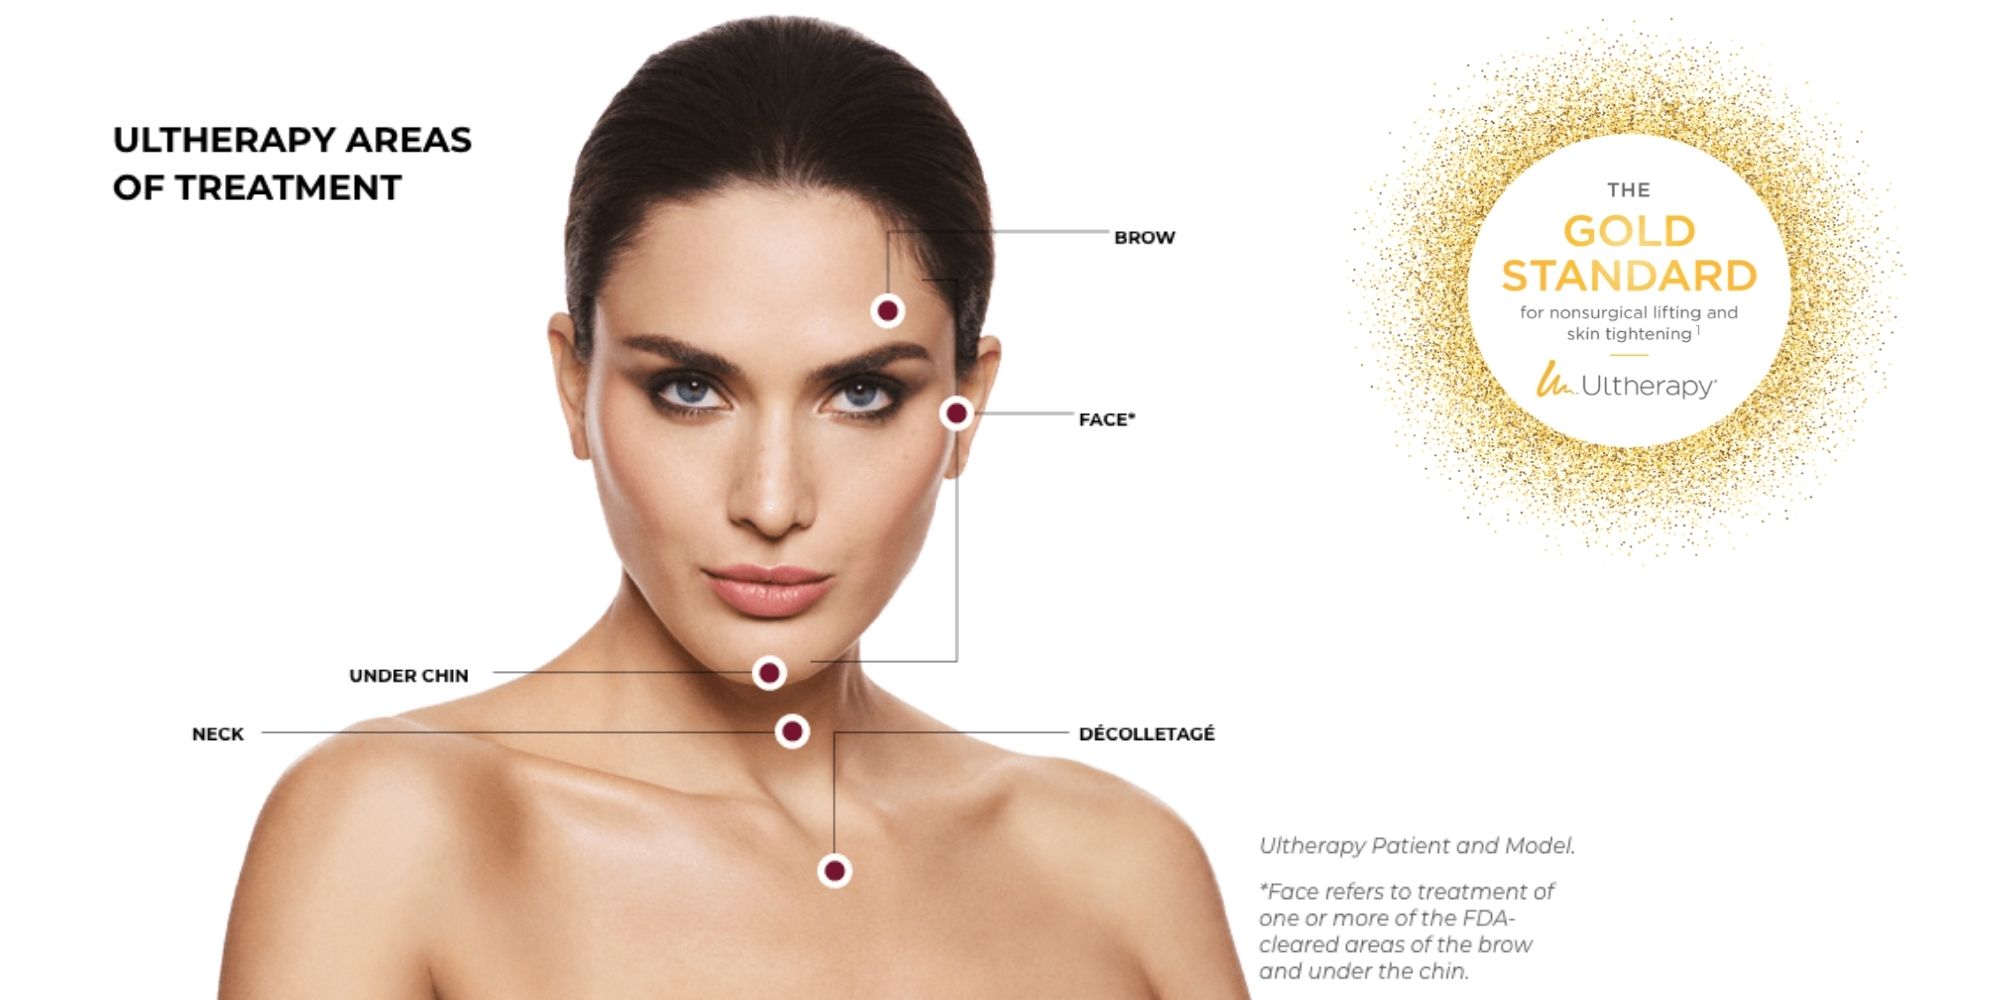 Ultherapy areas of treatment